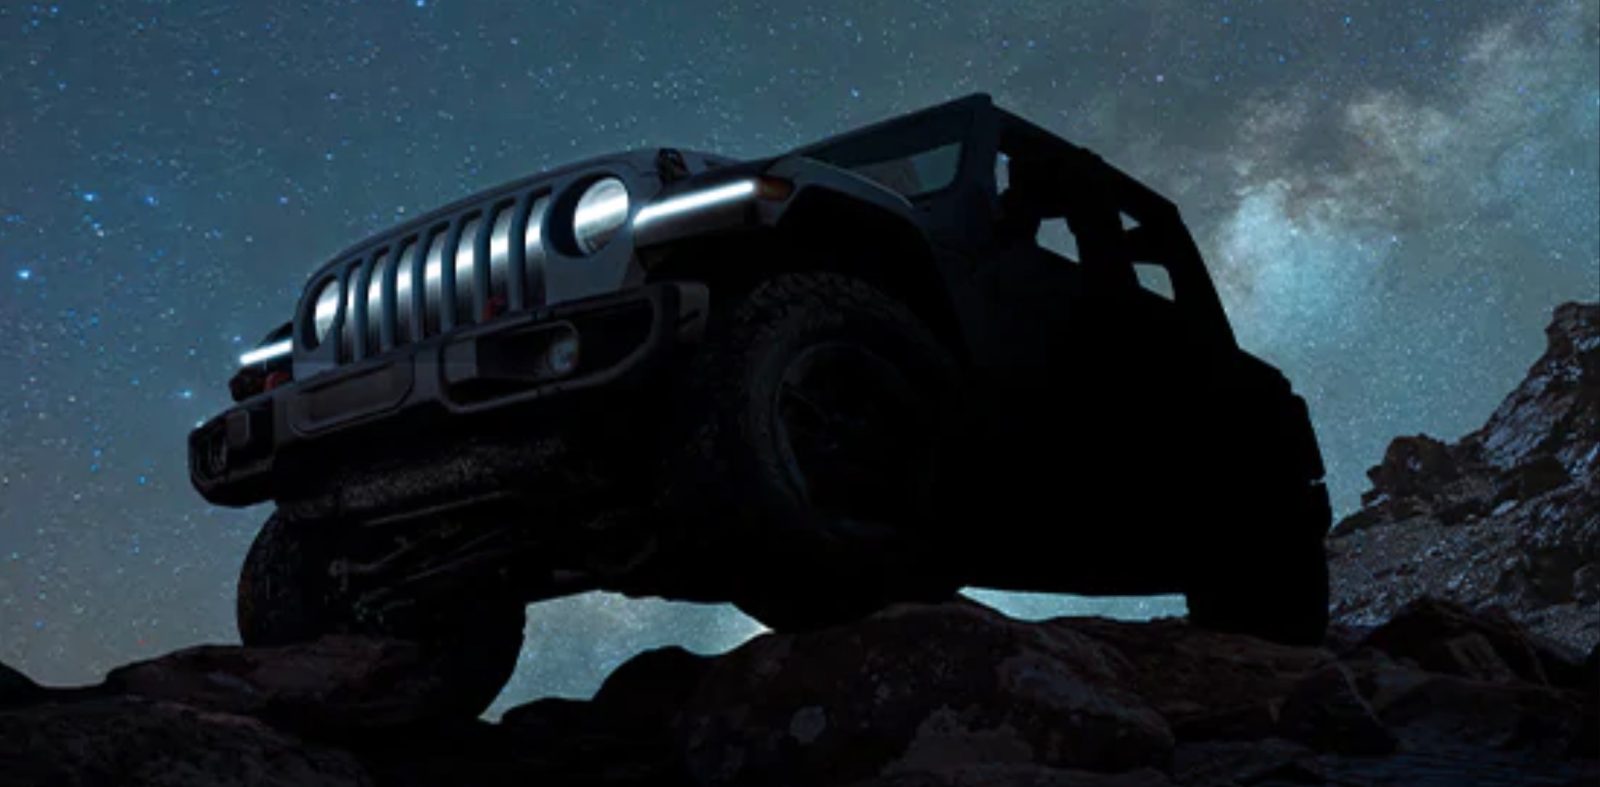 Jeep teases new Wrangler all-electric BEV concept vehicle to be unveiled  soon | Electrek